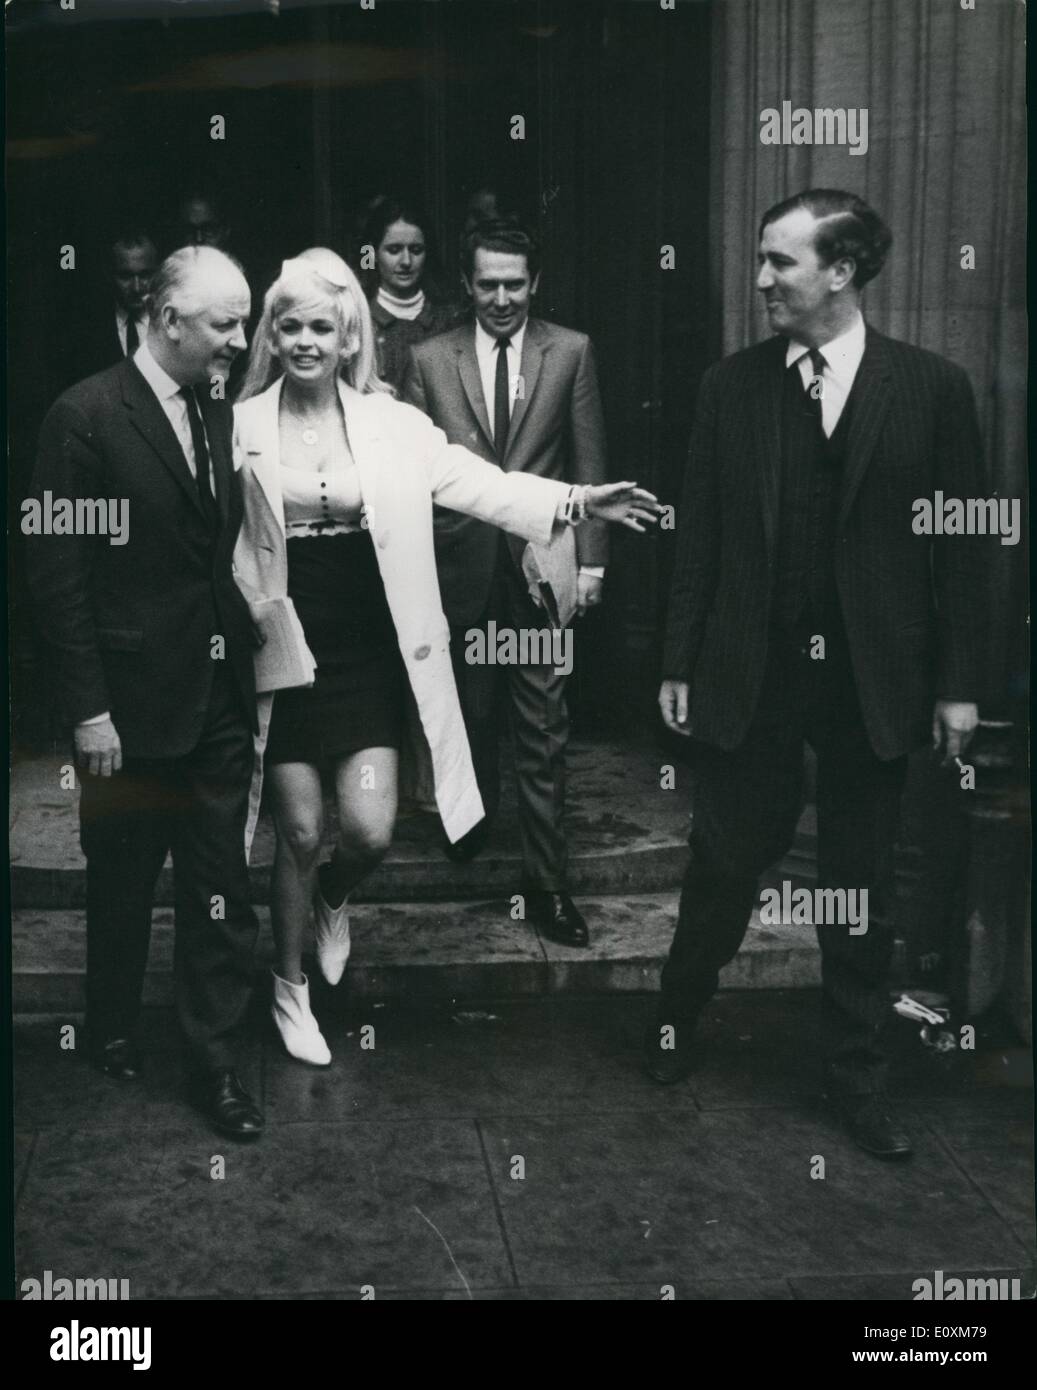 Apr. 04, 1967 - Jayne Mansfield Visits House of Commons: Jayne Mansfield, the American star, visited the House of Commons yesterday and brought the proceedings to a halt while the speaker called for order. Jayne sat in the seat usually used by the Prime Minister's wife. She were a low cut blouse and mini-skirt - ''the most conservative I've got.'' Miss Mansfield was the guest of two Conservative Whips, Mr. Timothy Kitson (Richmond, Yorks), and Mr. Robet Elliott (Newcastle, North). When I went into the Speaker's Gallery,'' she said, ''lot of heads turned and gave me smiles Stock Photo